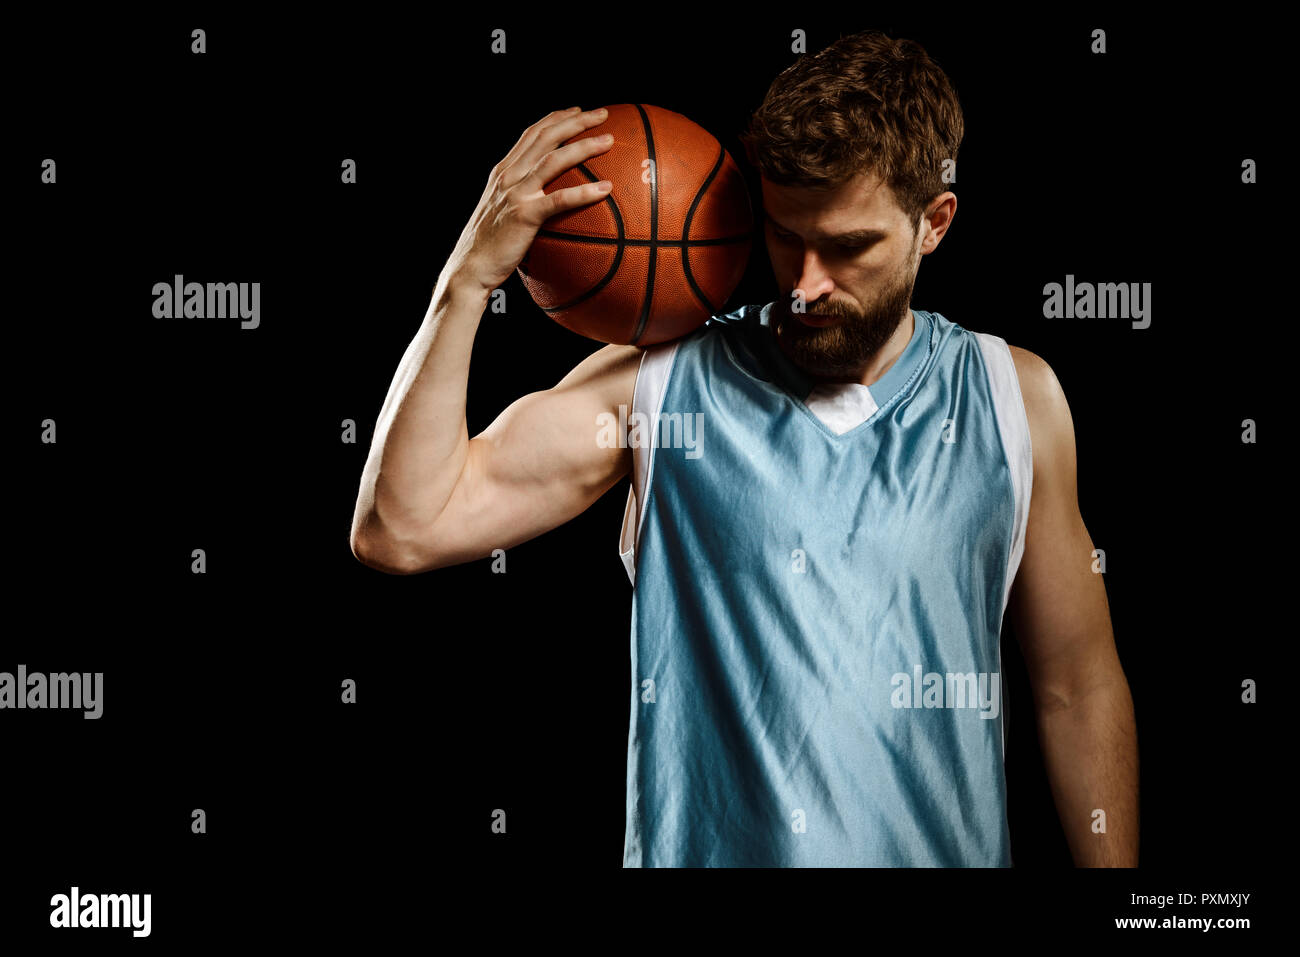 Senior Pictures Basketball Poses | Planet Bell